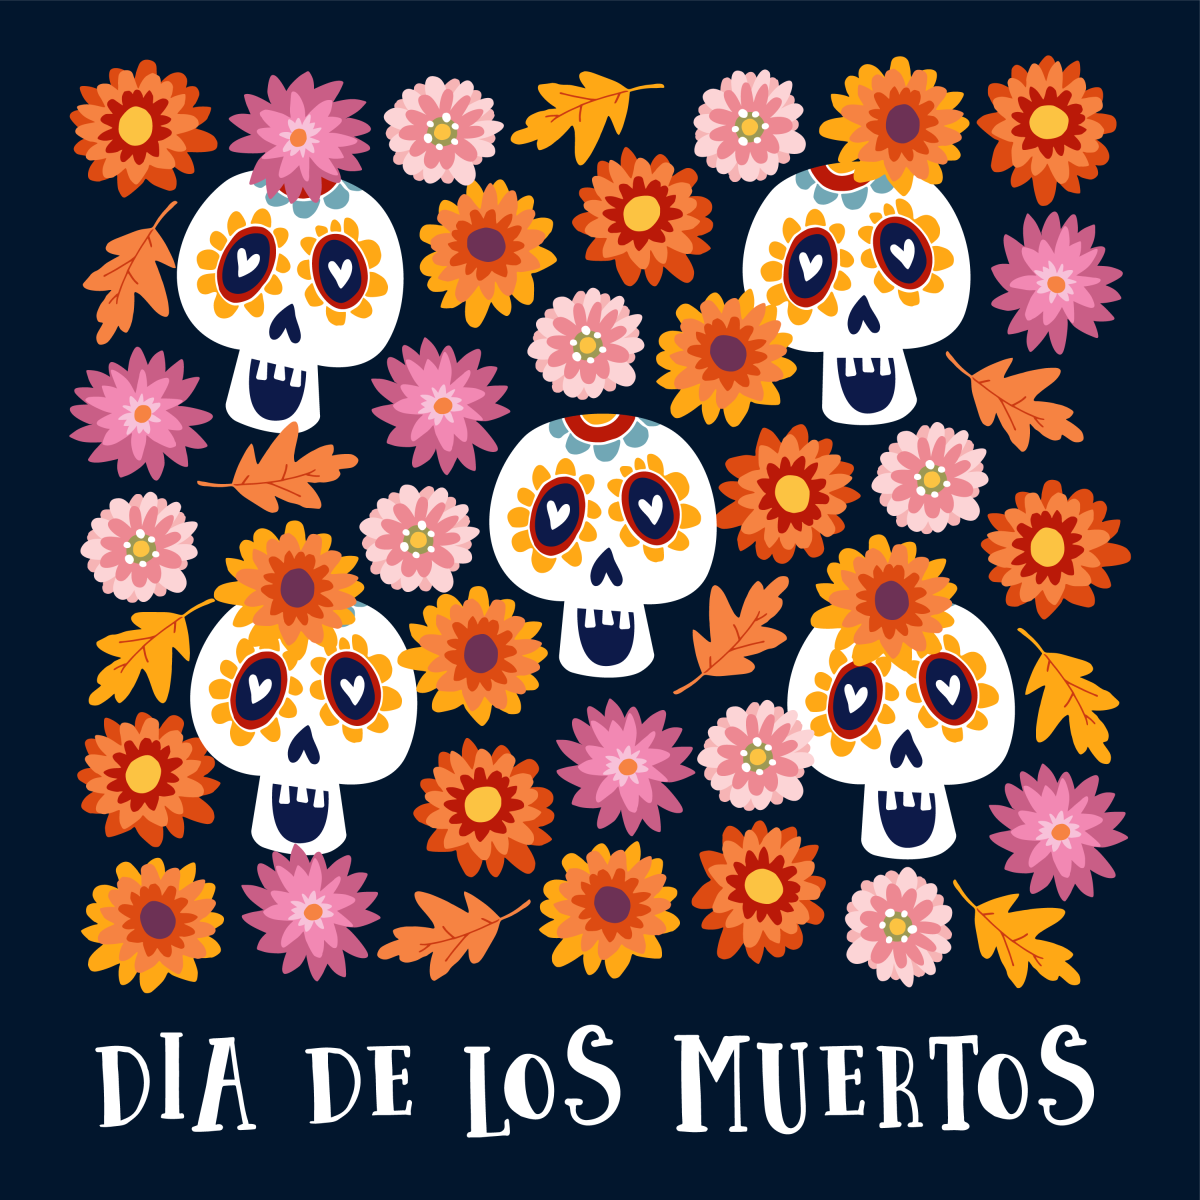 Words "Dia de los Muertos" with smiling skulls, flowers and leaves